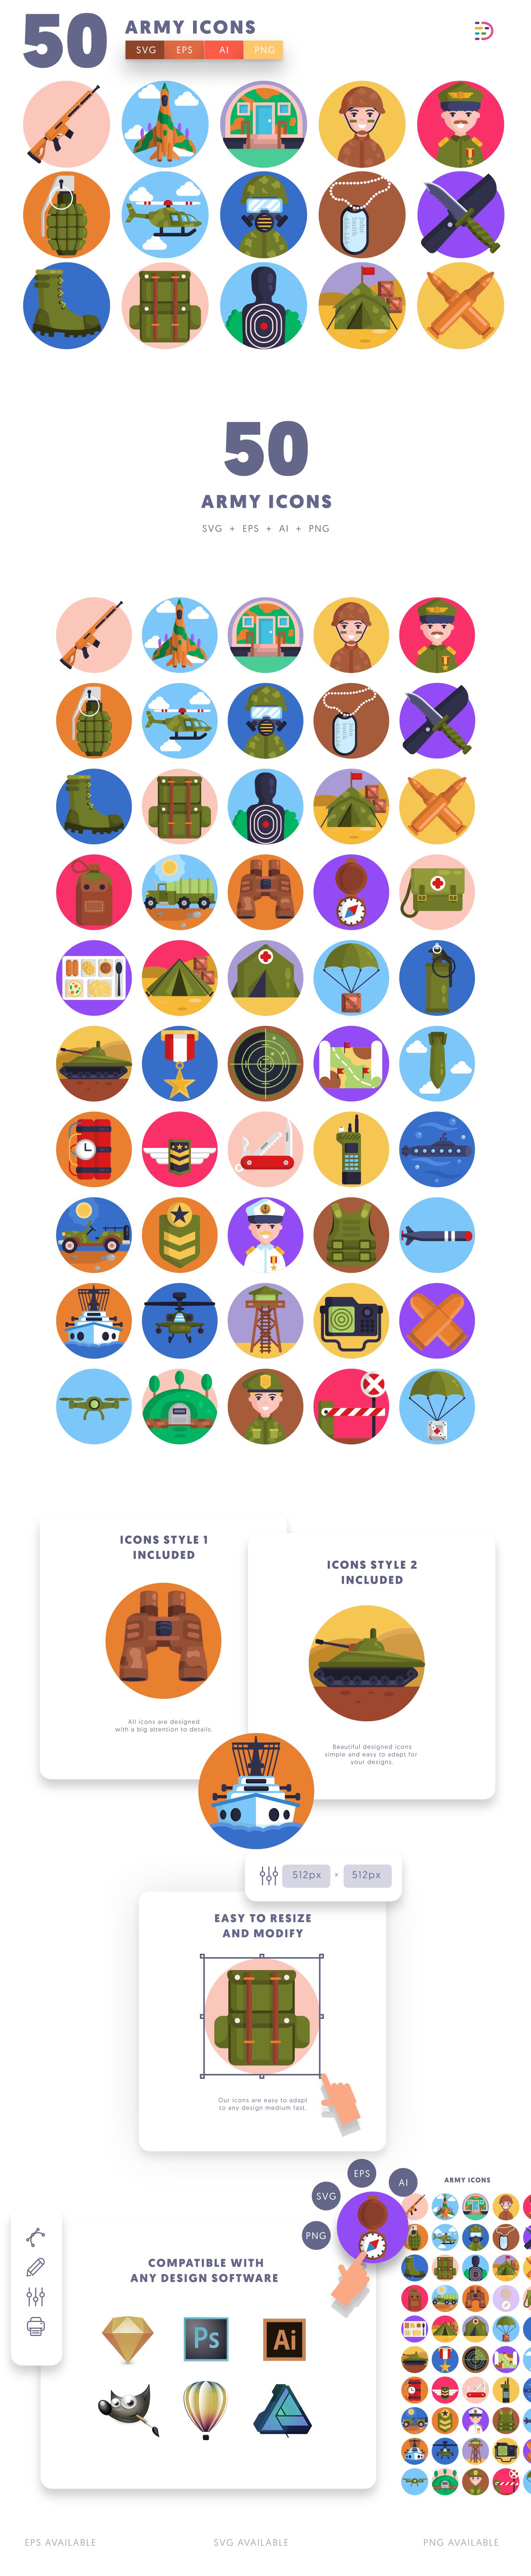 Editable army icons icon pack, easy to edit and customize icons